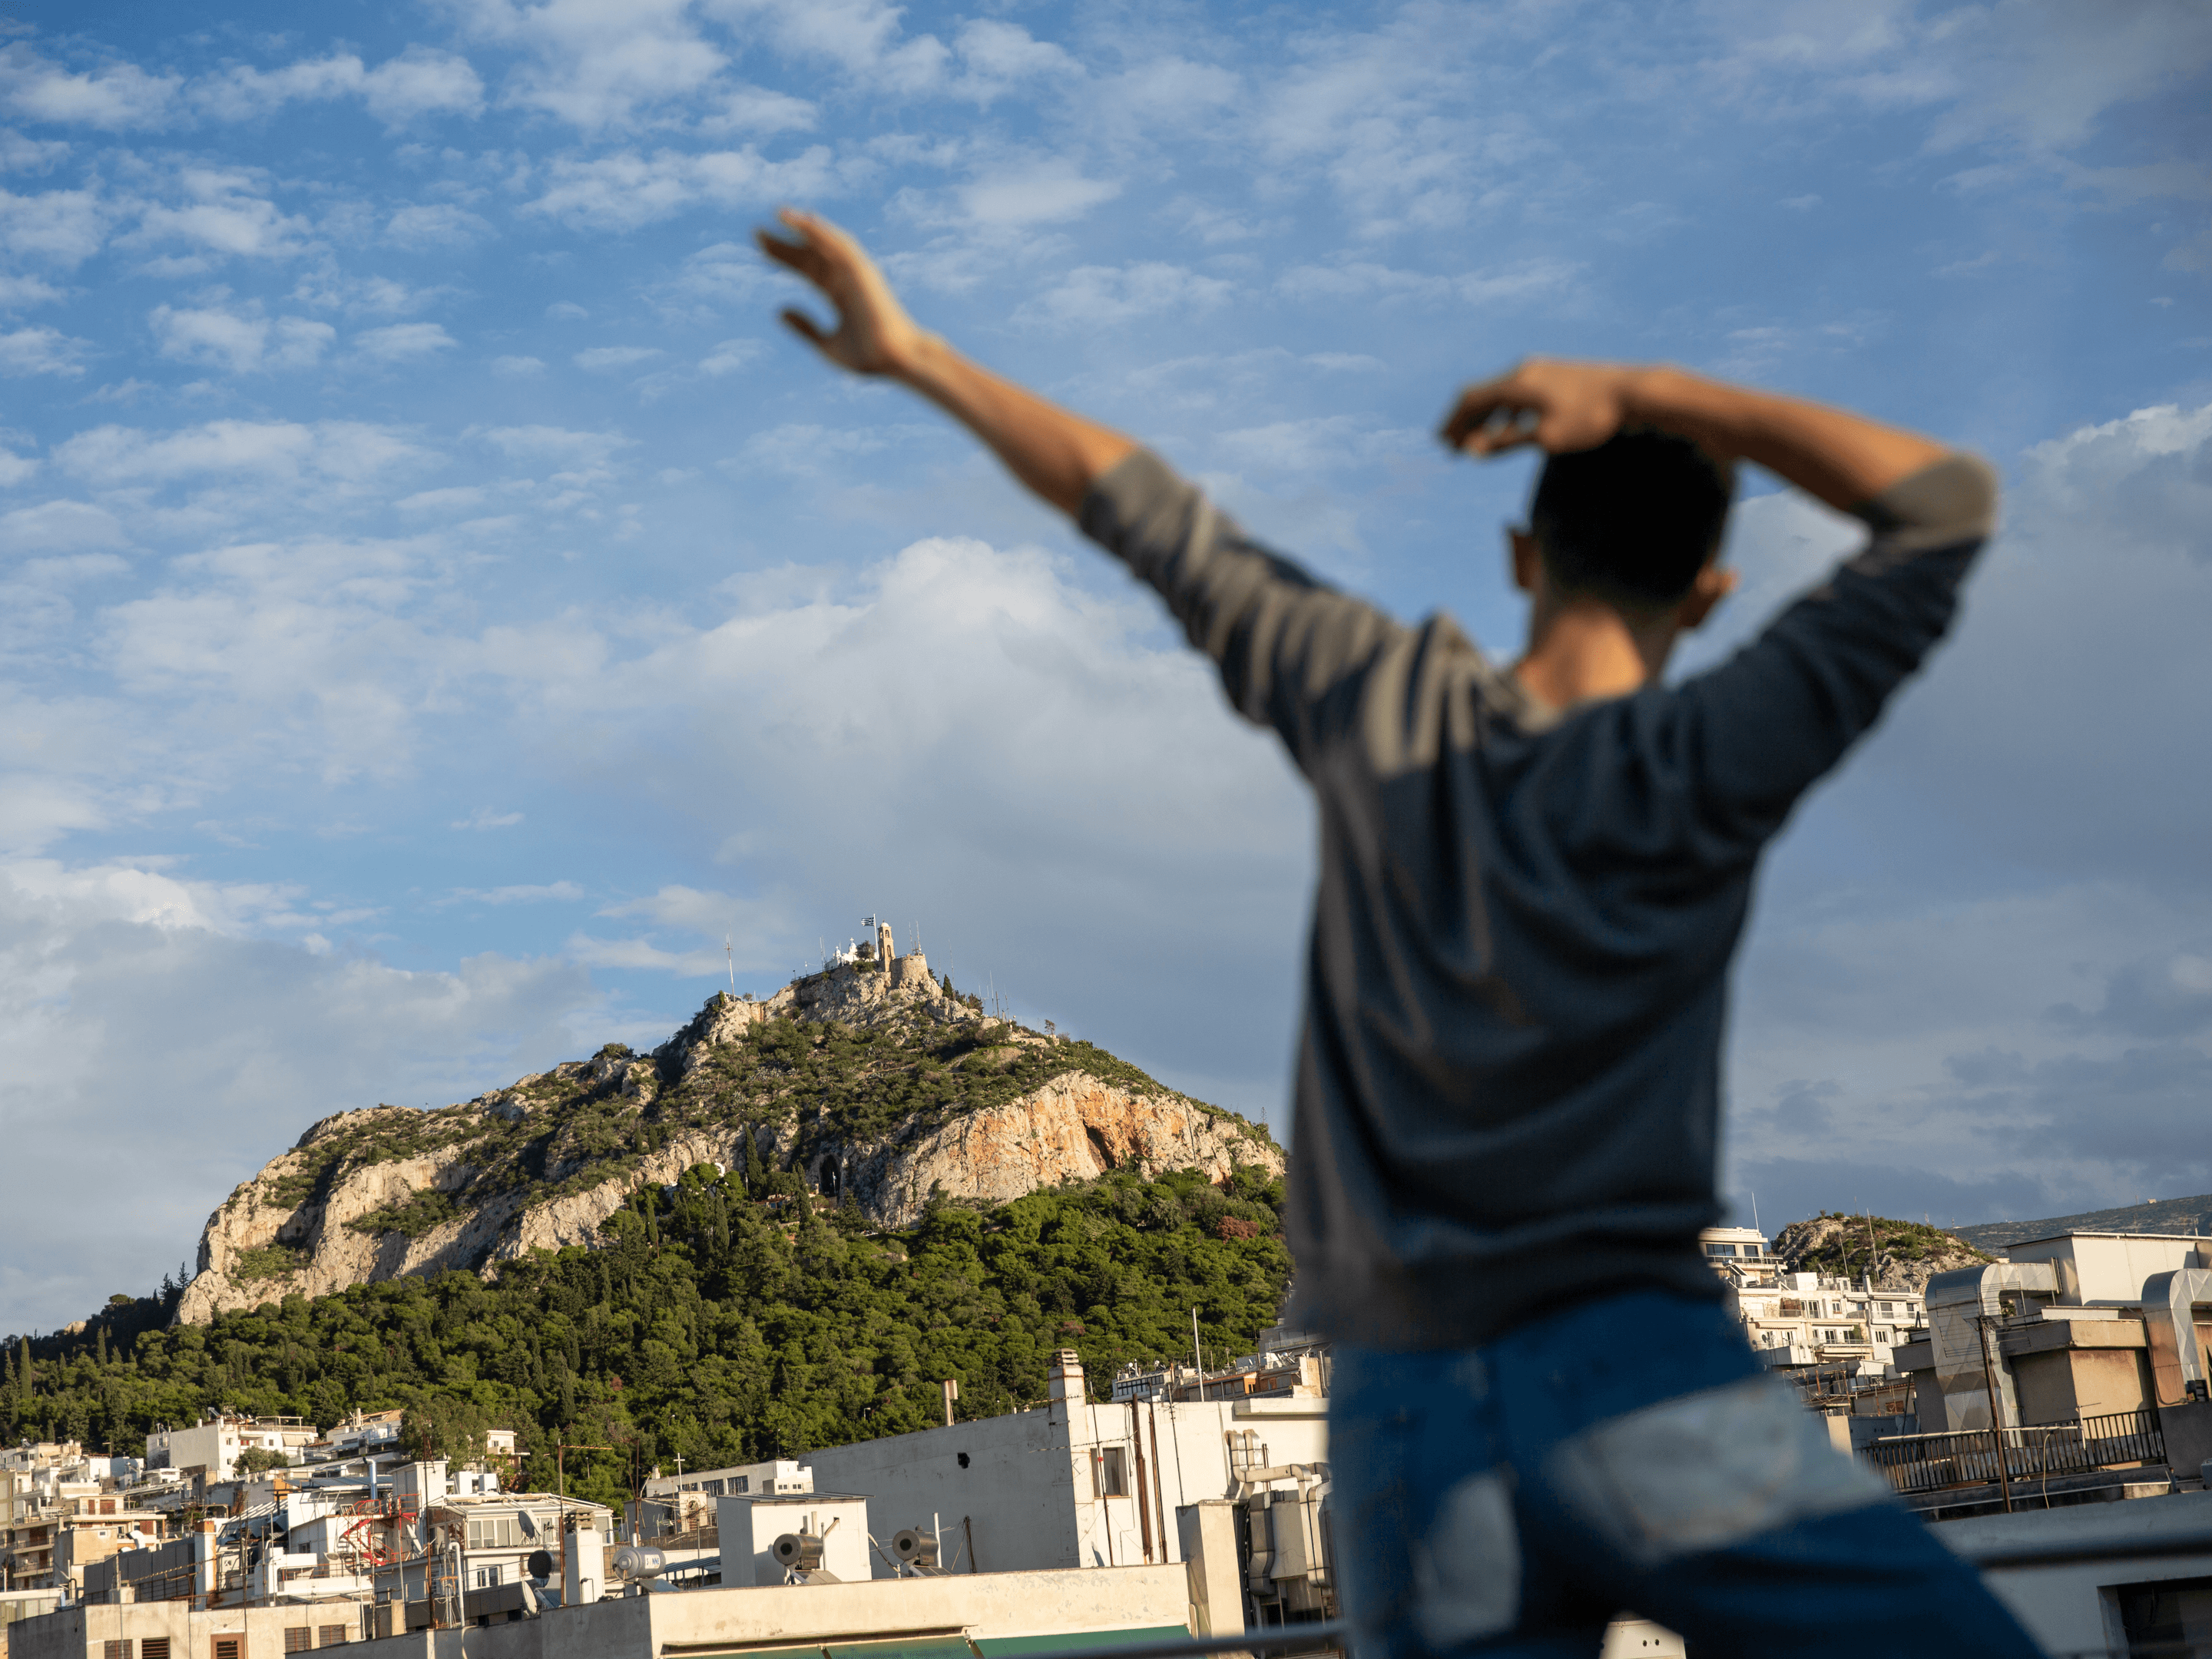 Dancers on Rooftops #74 - Thanos (Greece, 2021)